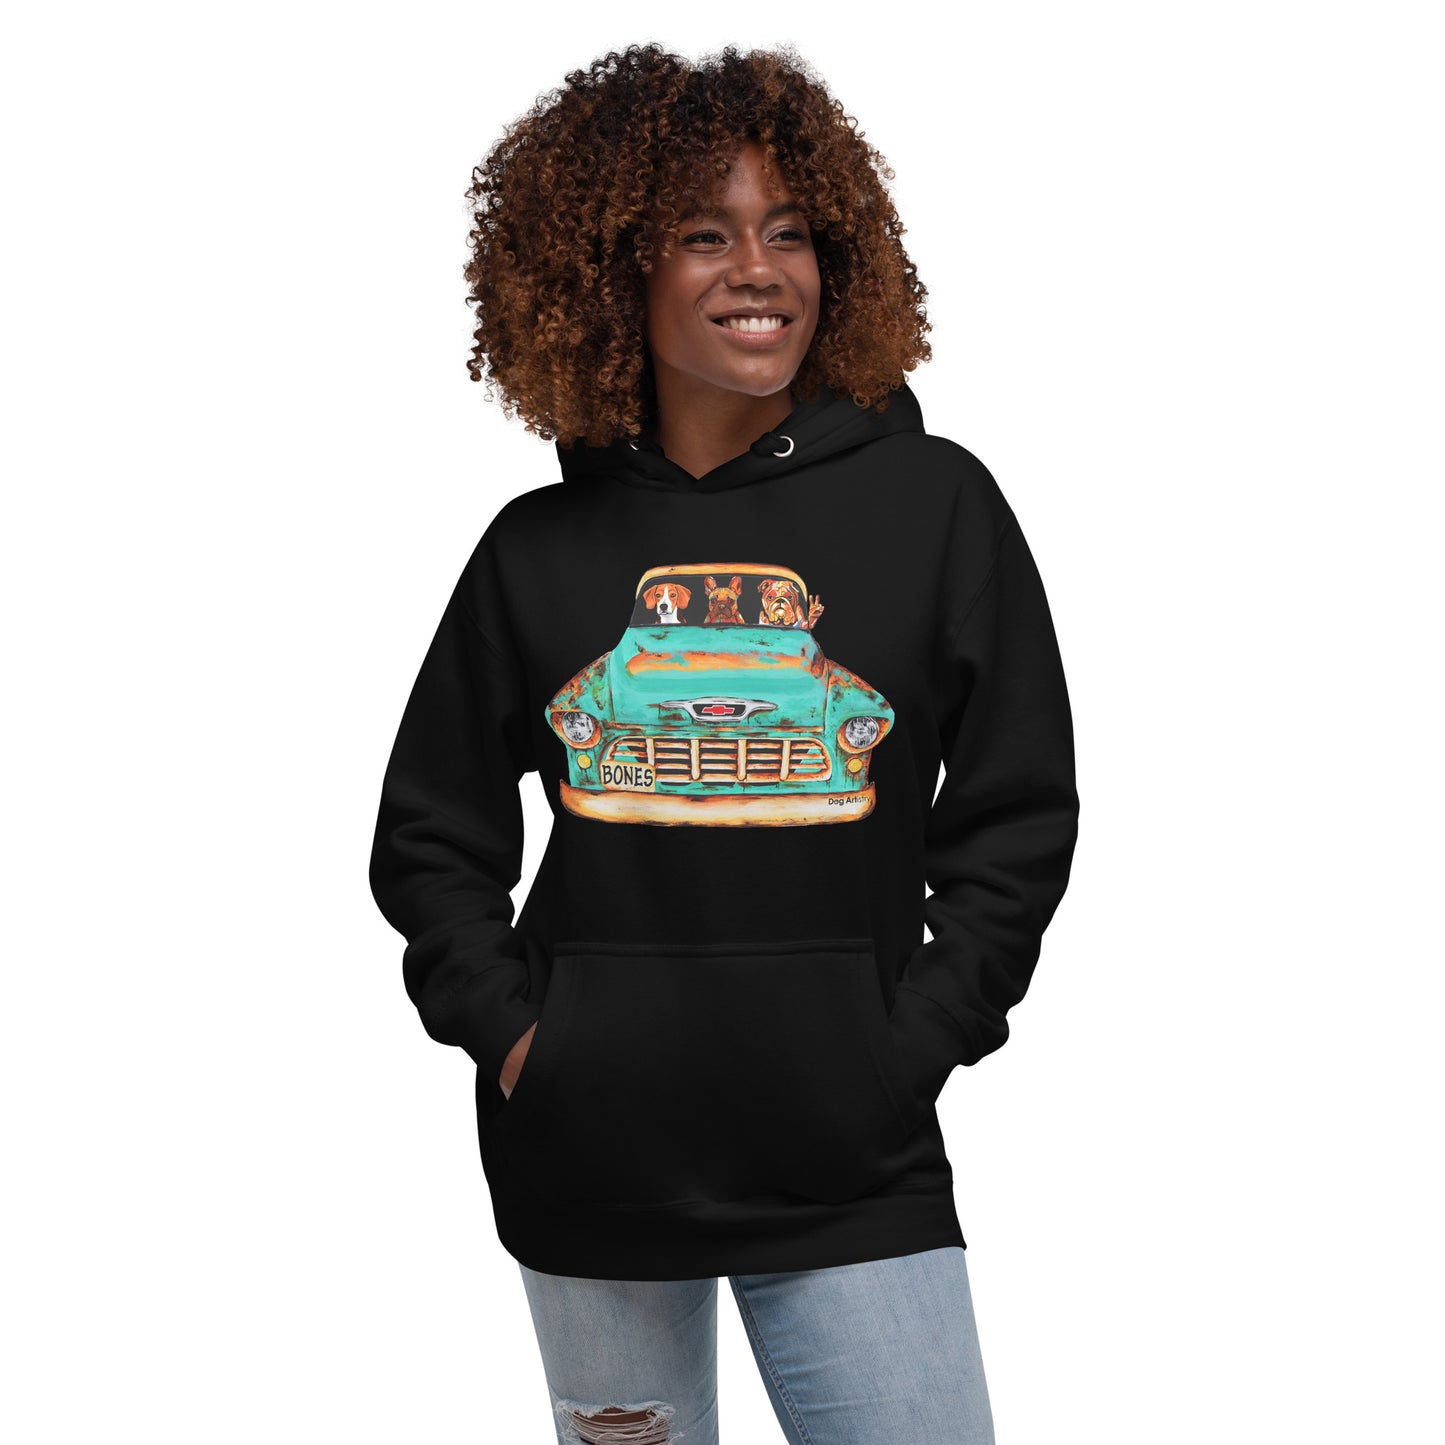 Dog Artistry Unisex Hoodie of a 55 Chevy Truck with Beagle, French Bulldog, and English Bulldog